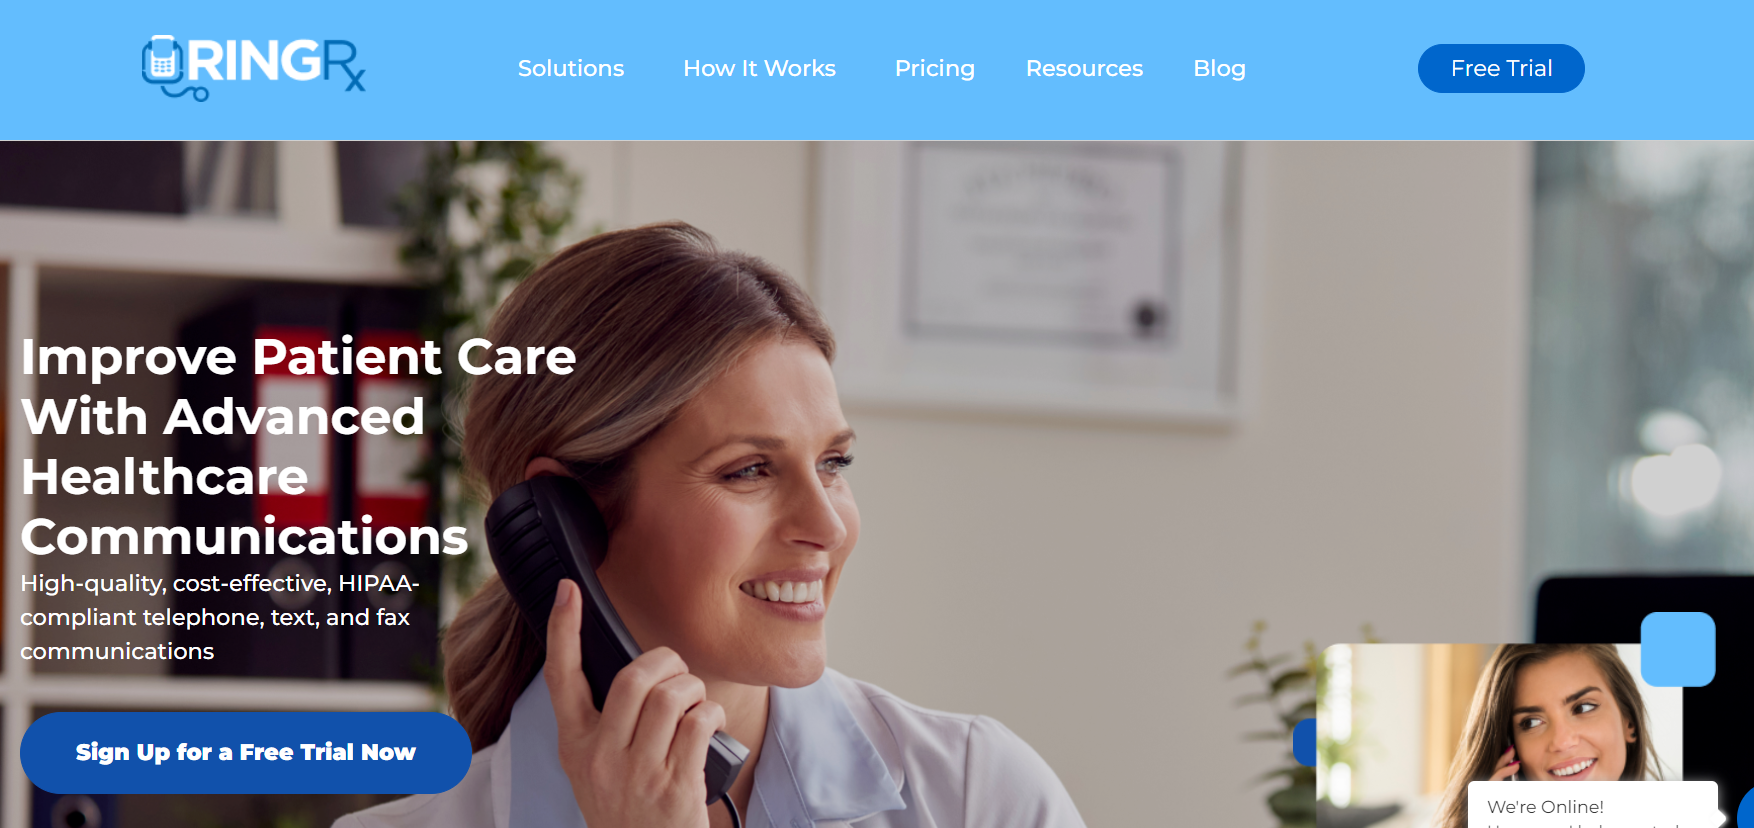 5 Best HIPAA-Compliant VoIP Solutions